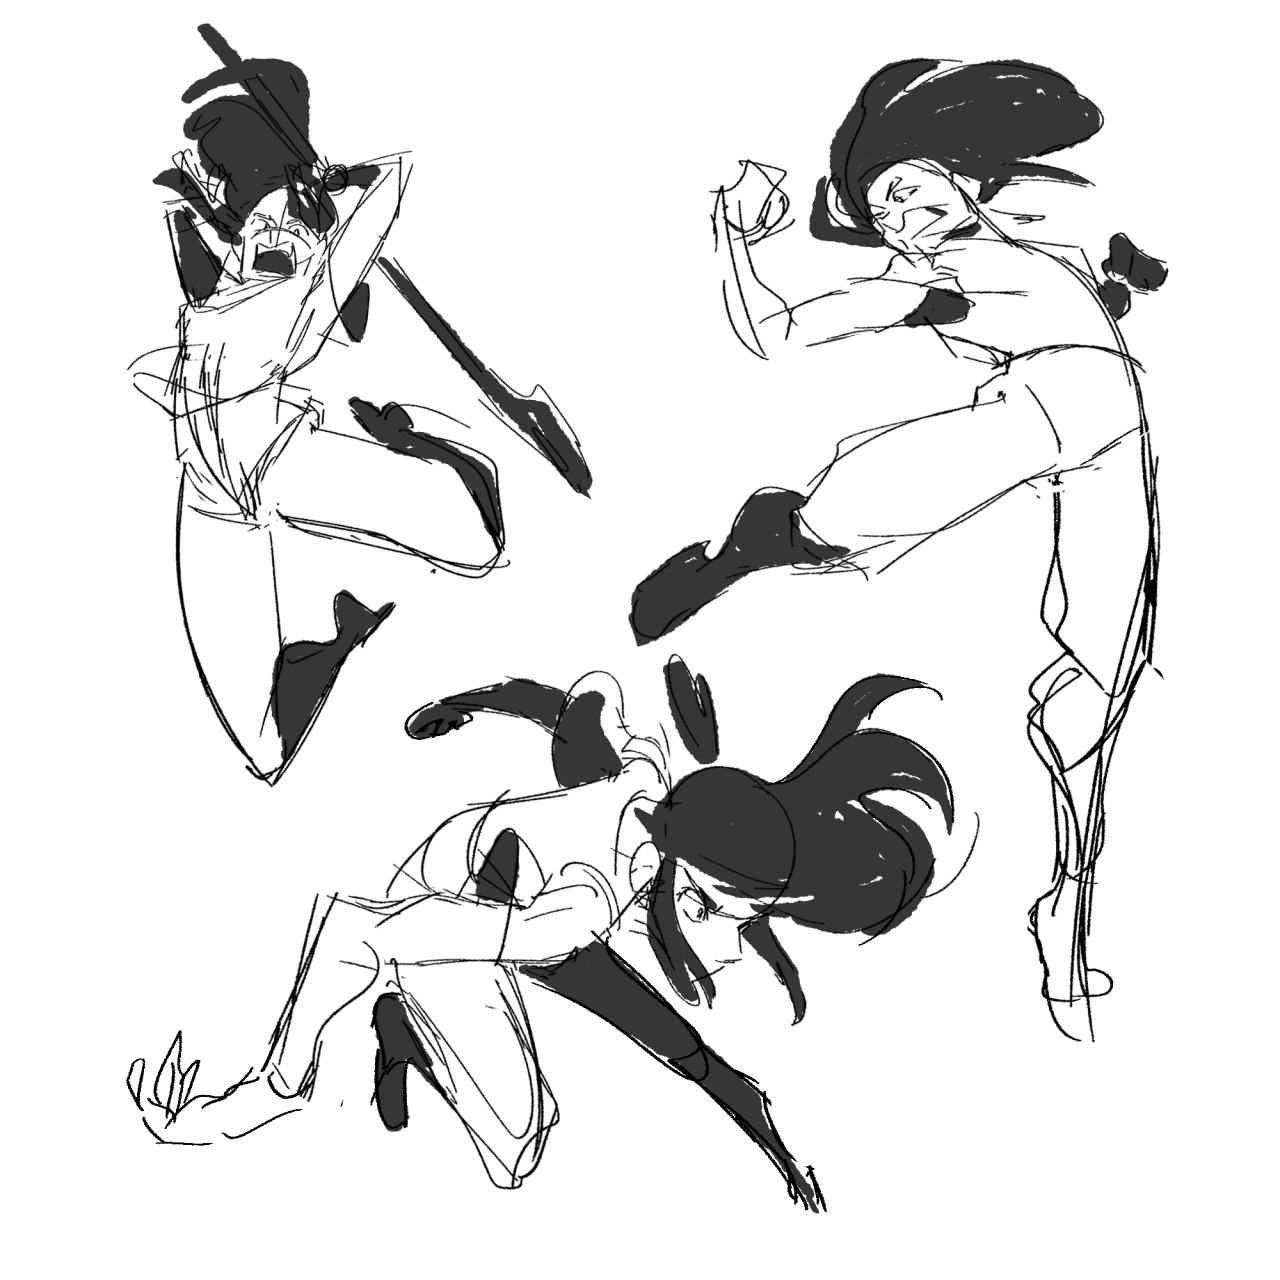 Dynamic pose practice by Elements-of-Time on DeviantArt